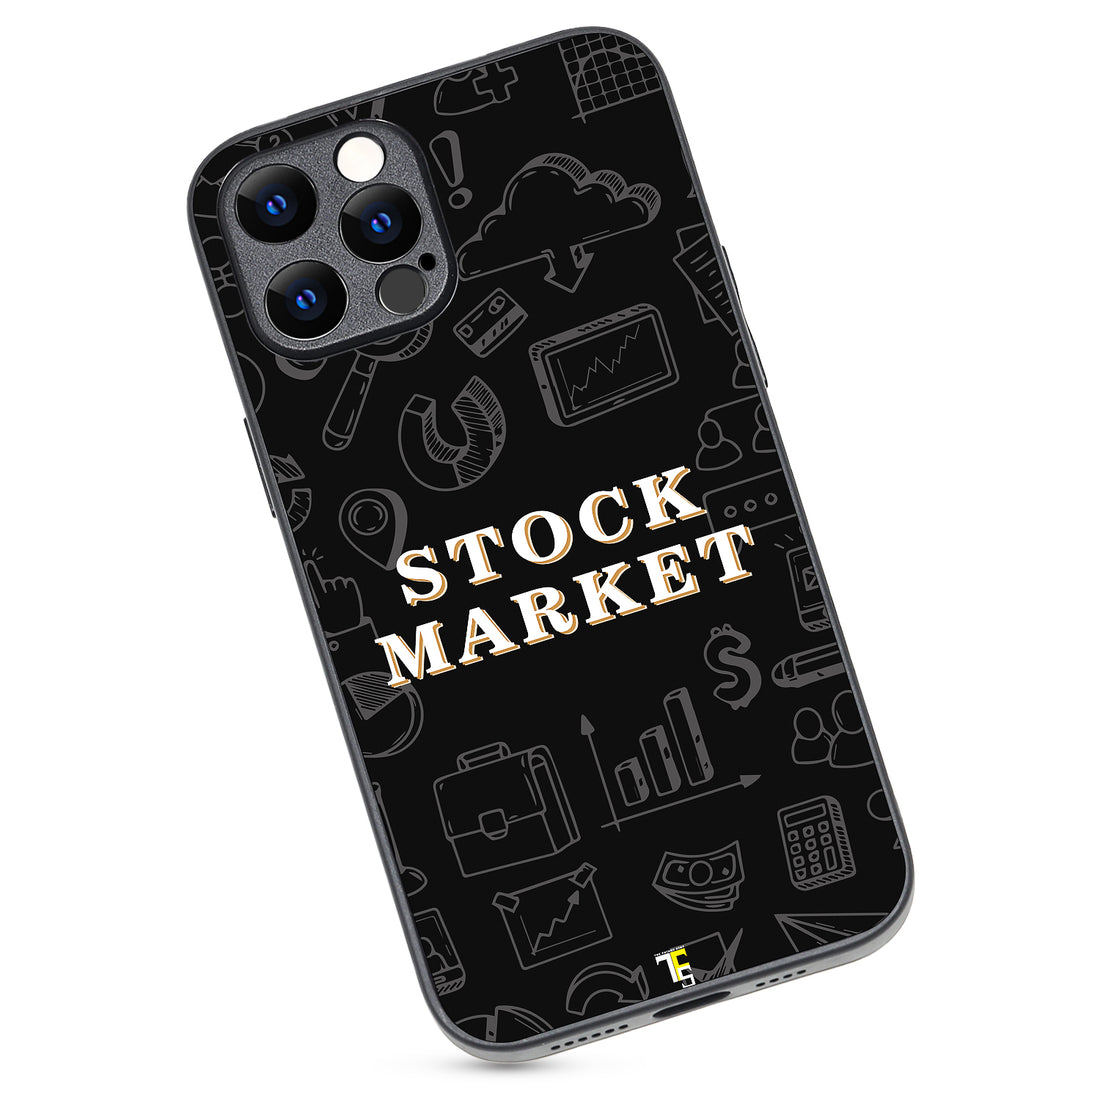 Stock Market Trading iPhone 12 Pro Max Case